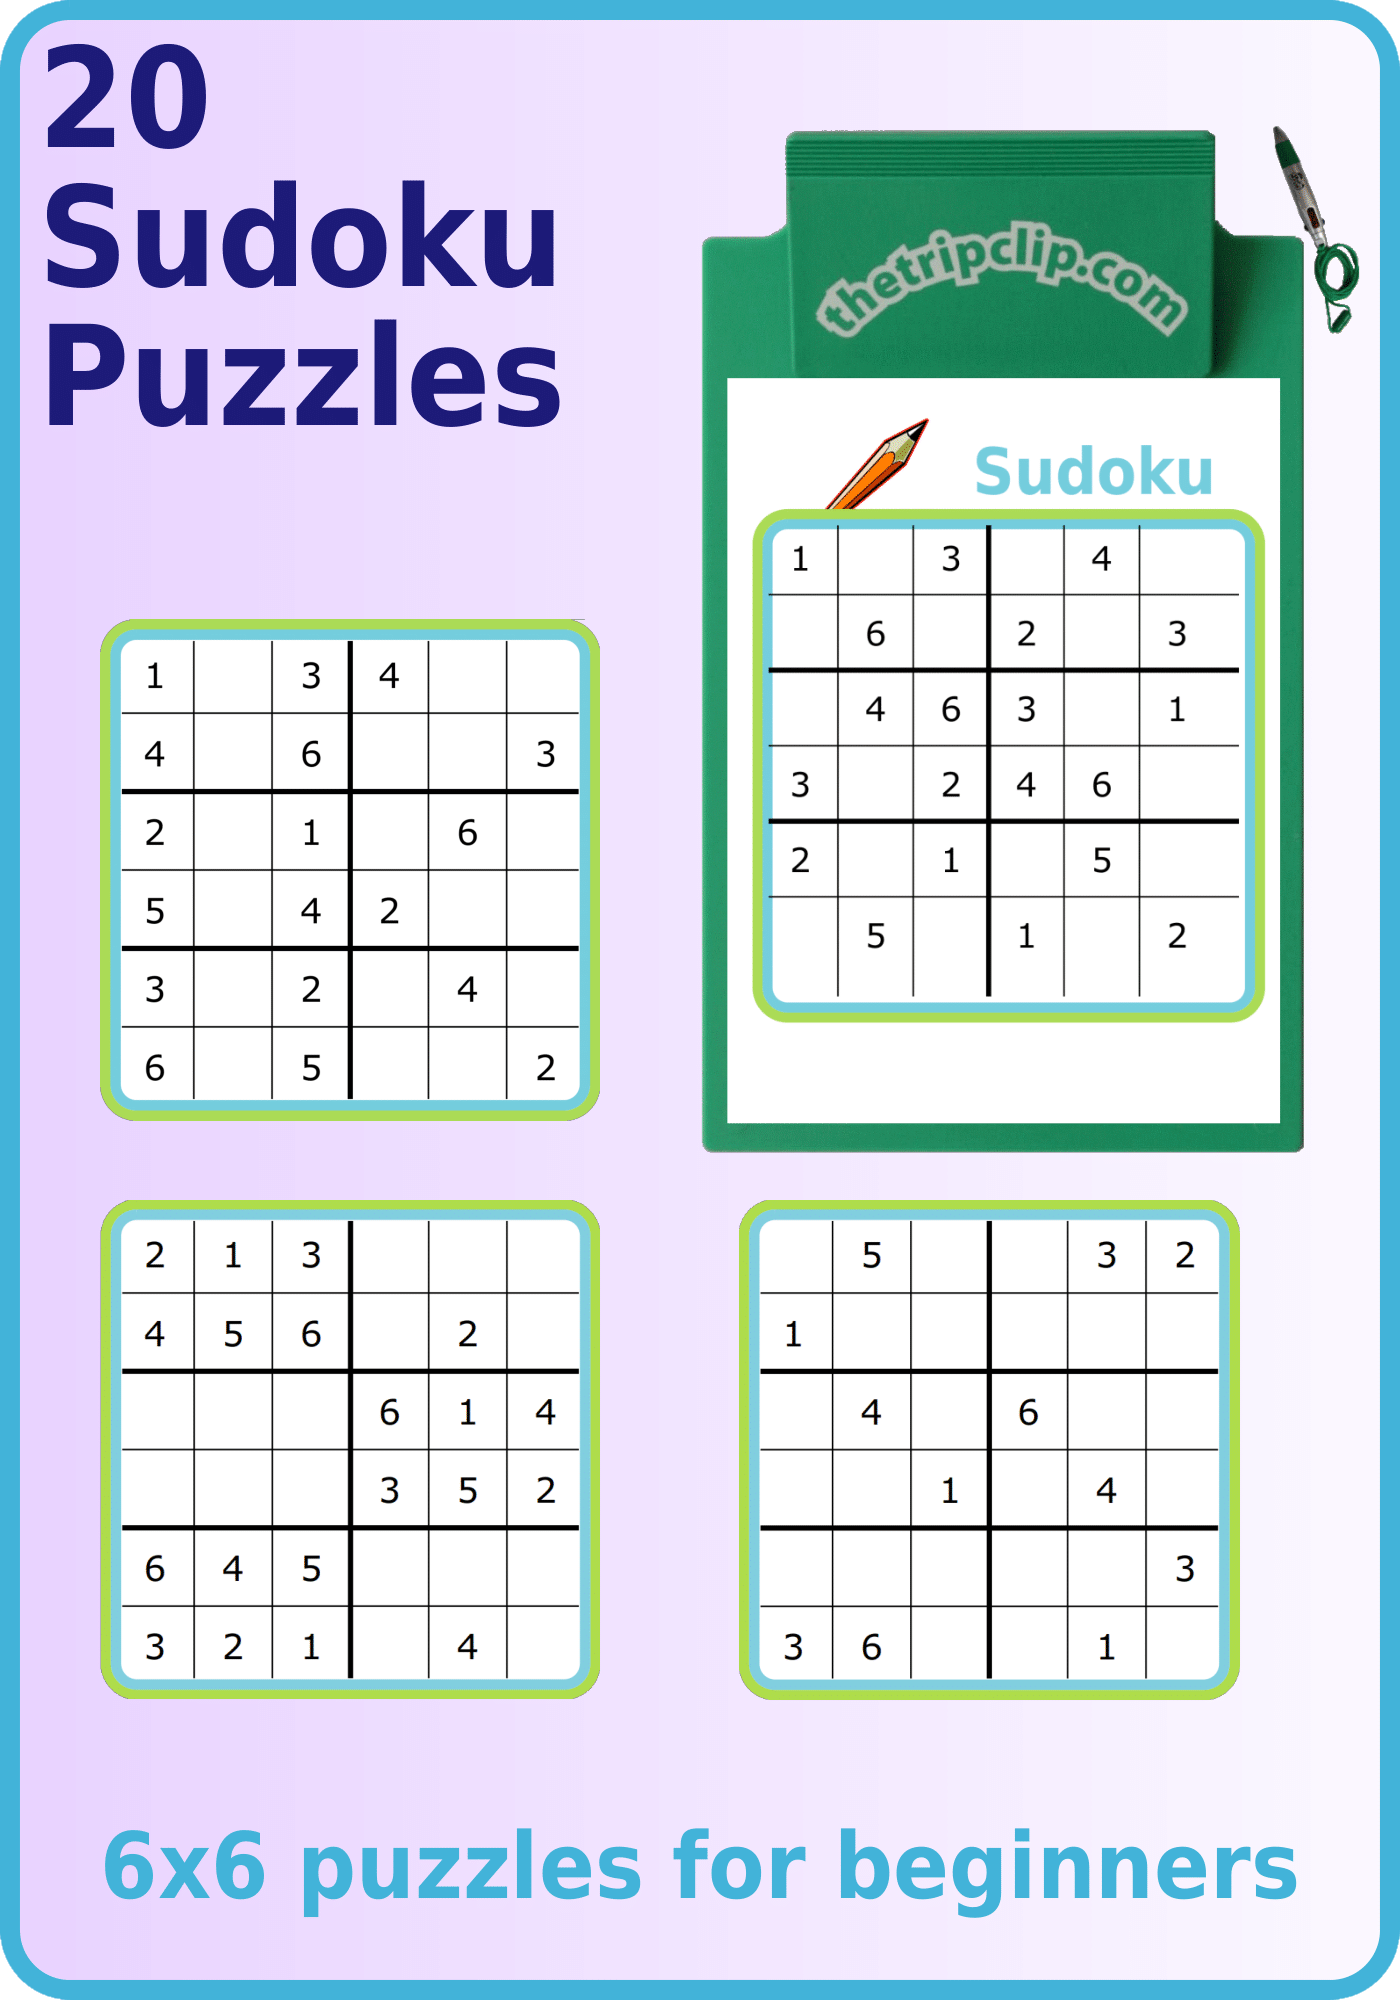 Four 6x6 sudoku puzzles, one on a kid-sized clipboards